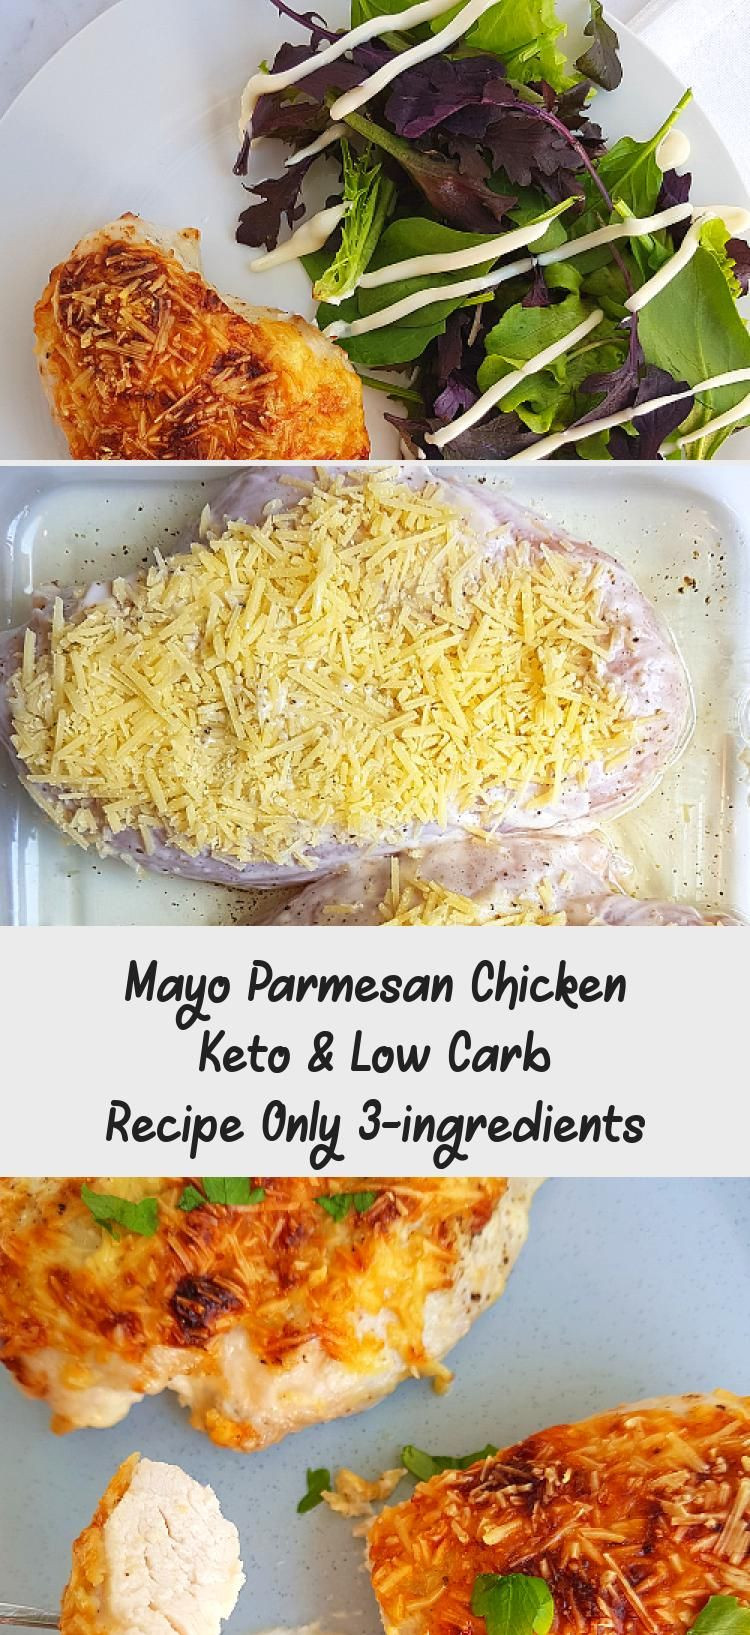 15 Fun and Creative Mayo Parmesan Chicken Keto - Best Product Reviews